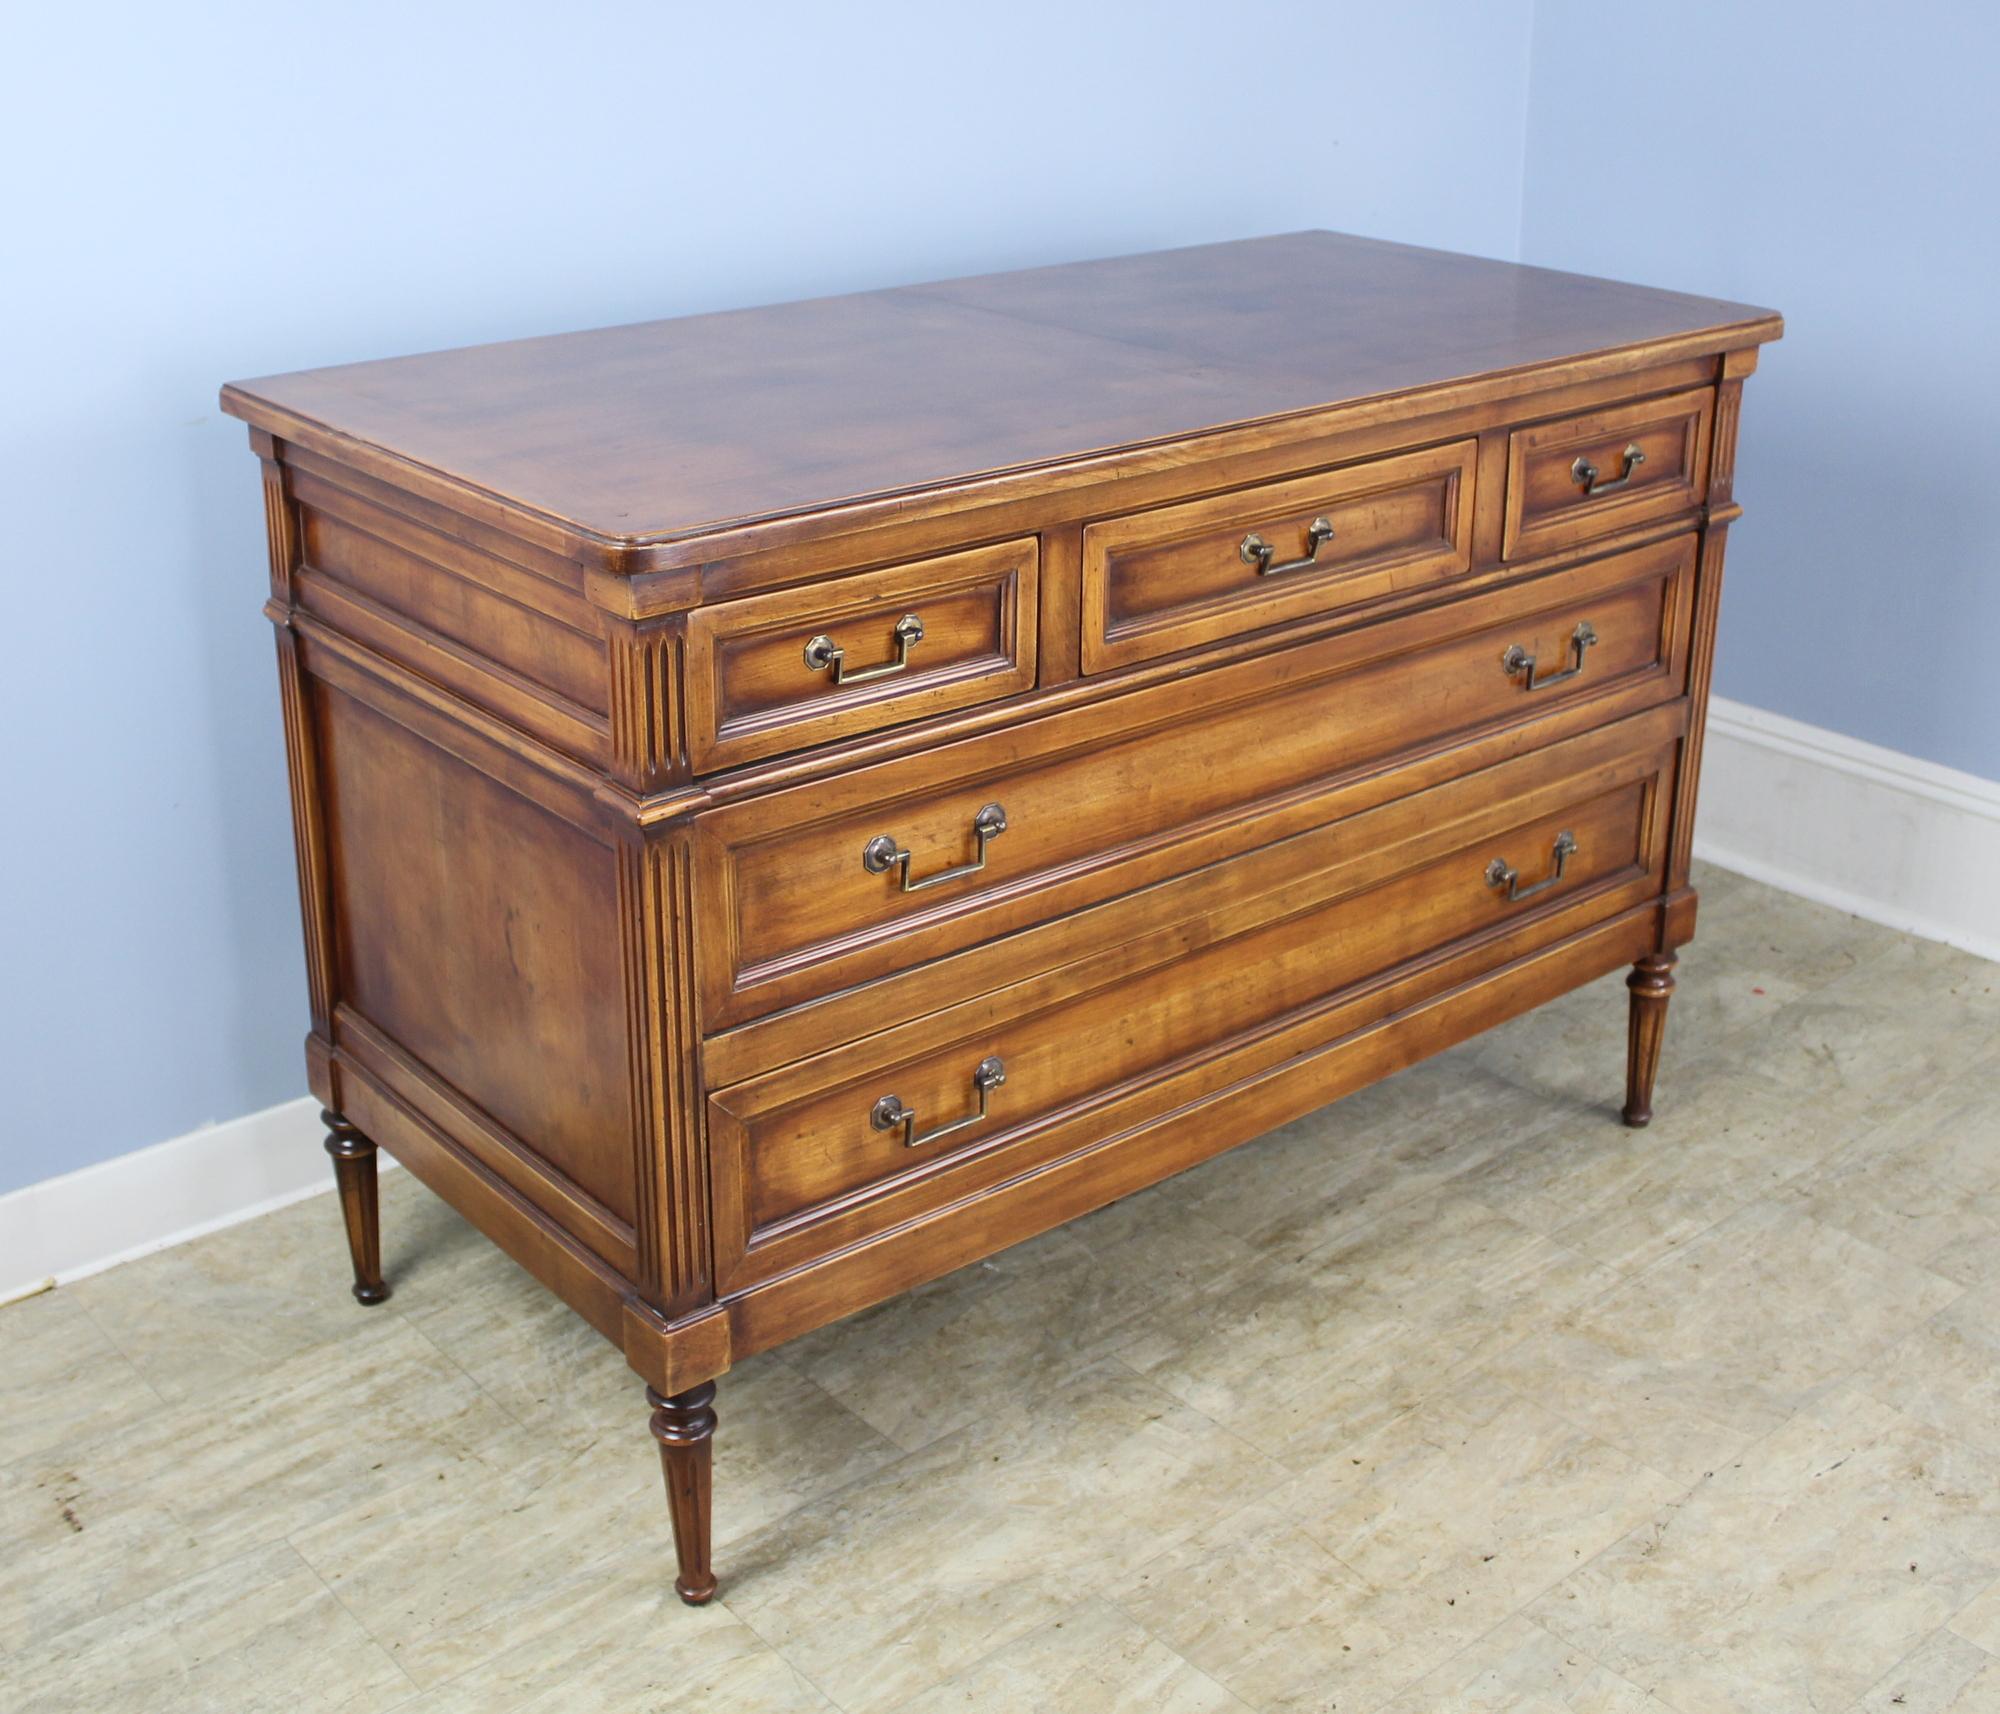 A handsome commode recently made in England. Excellent carved detail and pretty cherrywood with high quality hardware and construction.